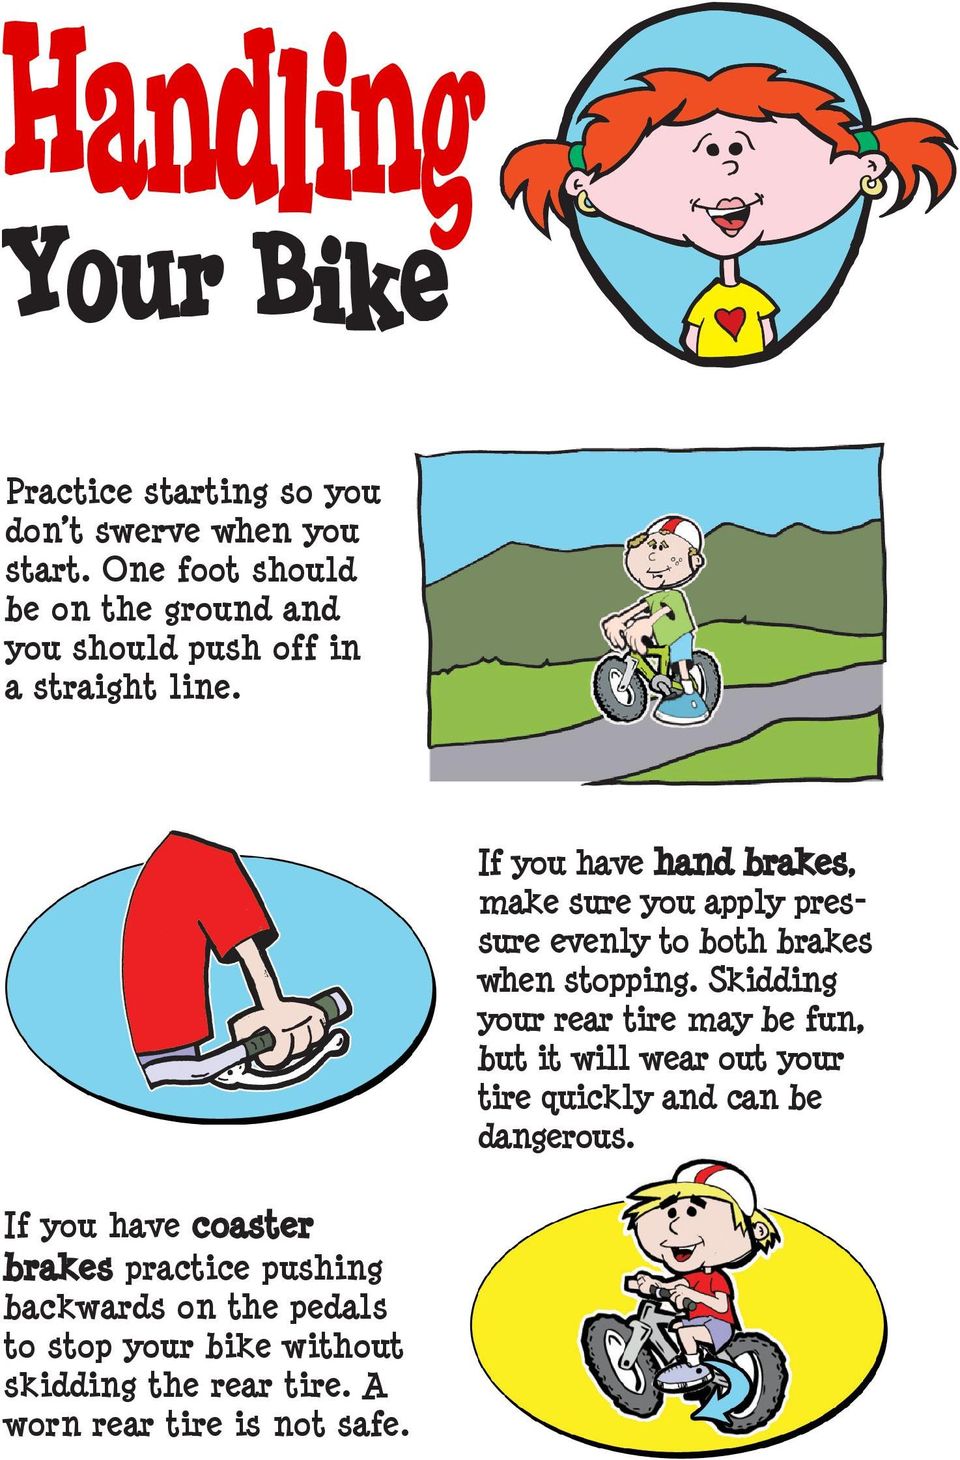 If you have coaster brakes practice pushing backwards on the pedals to stop your bike without skidding the rear tire.